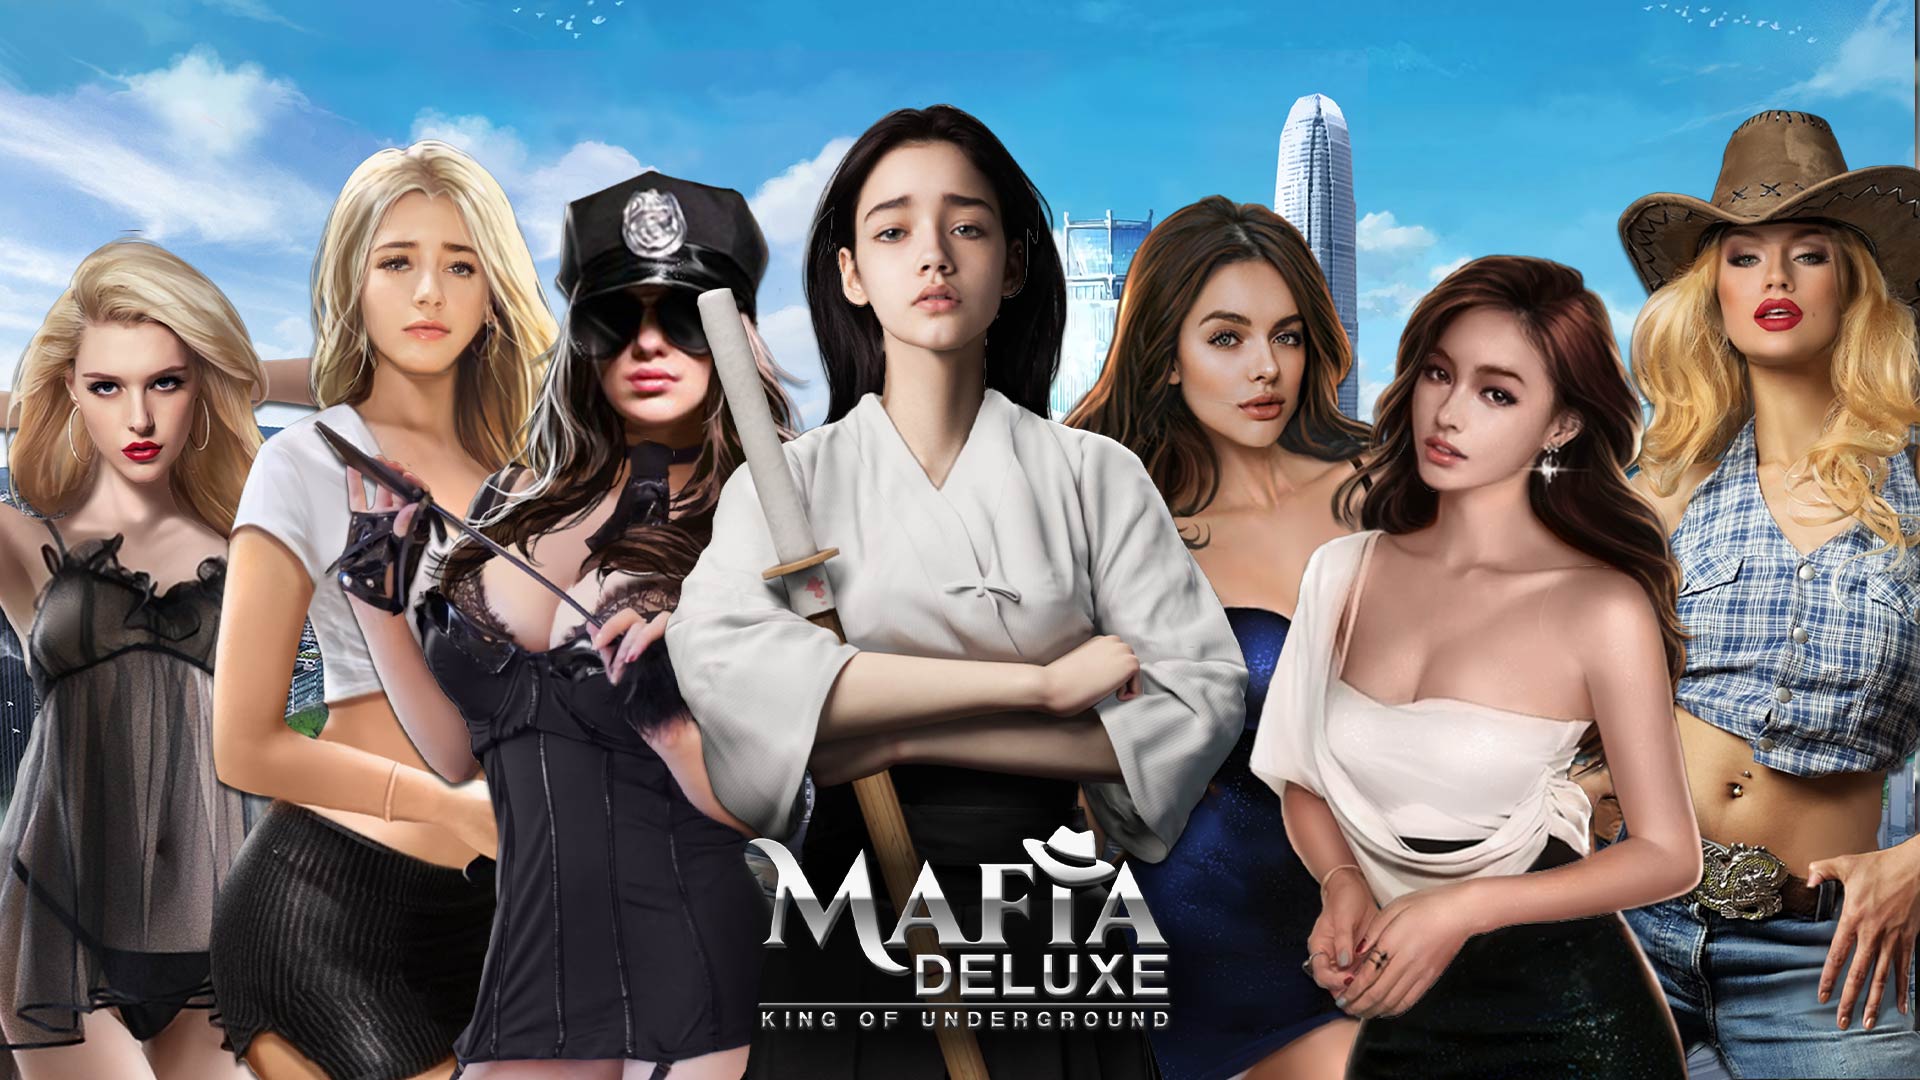 Real Gangster Women Porn - Mafia King of Underground Deluxe - Simulation Sex Game with APK file |  Nutaku